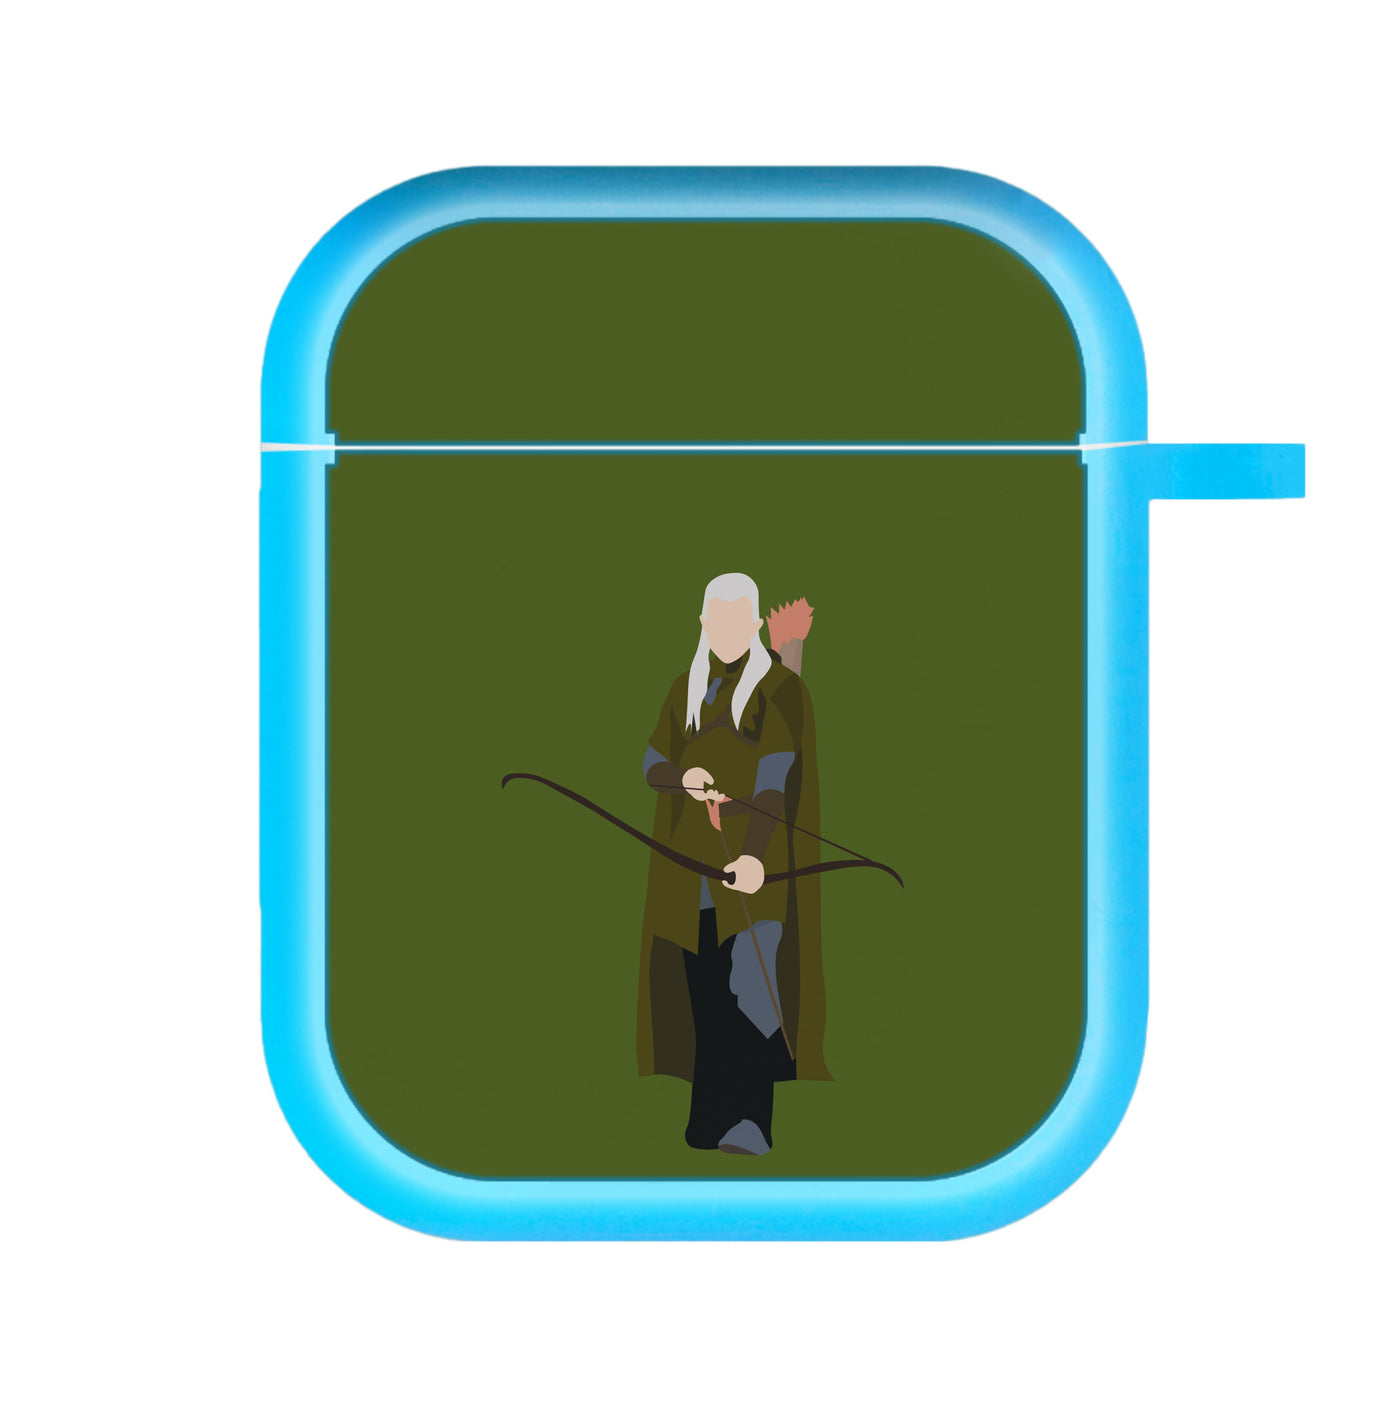 Legolas - Lord Of The Rings AirPods Case